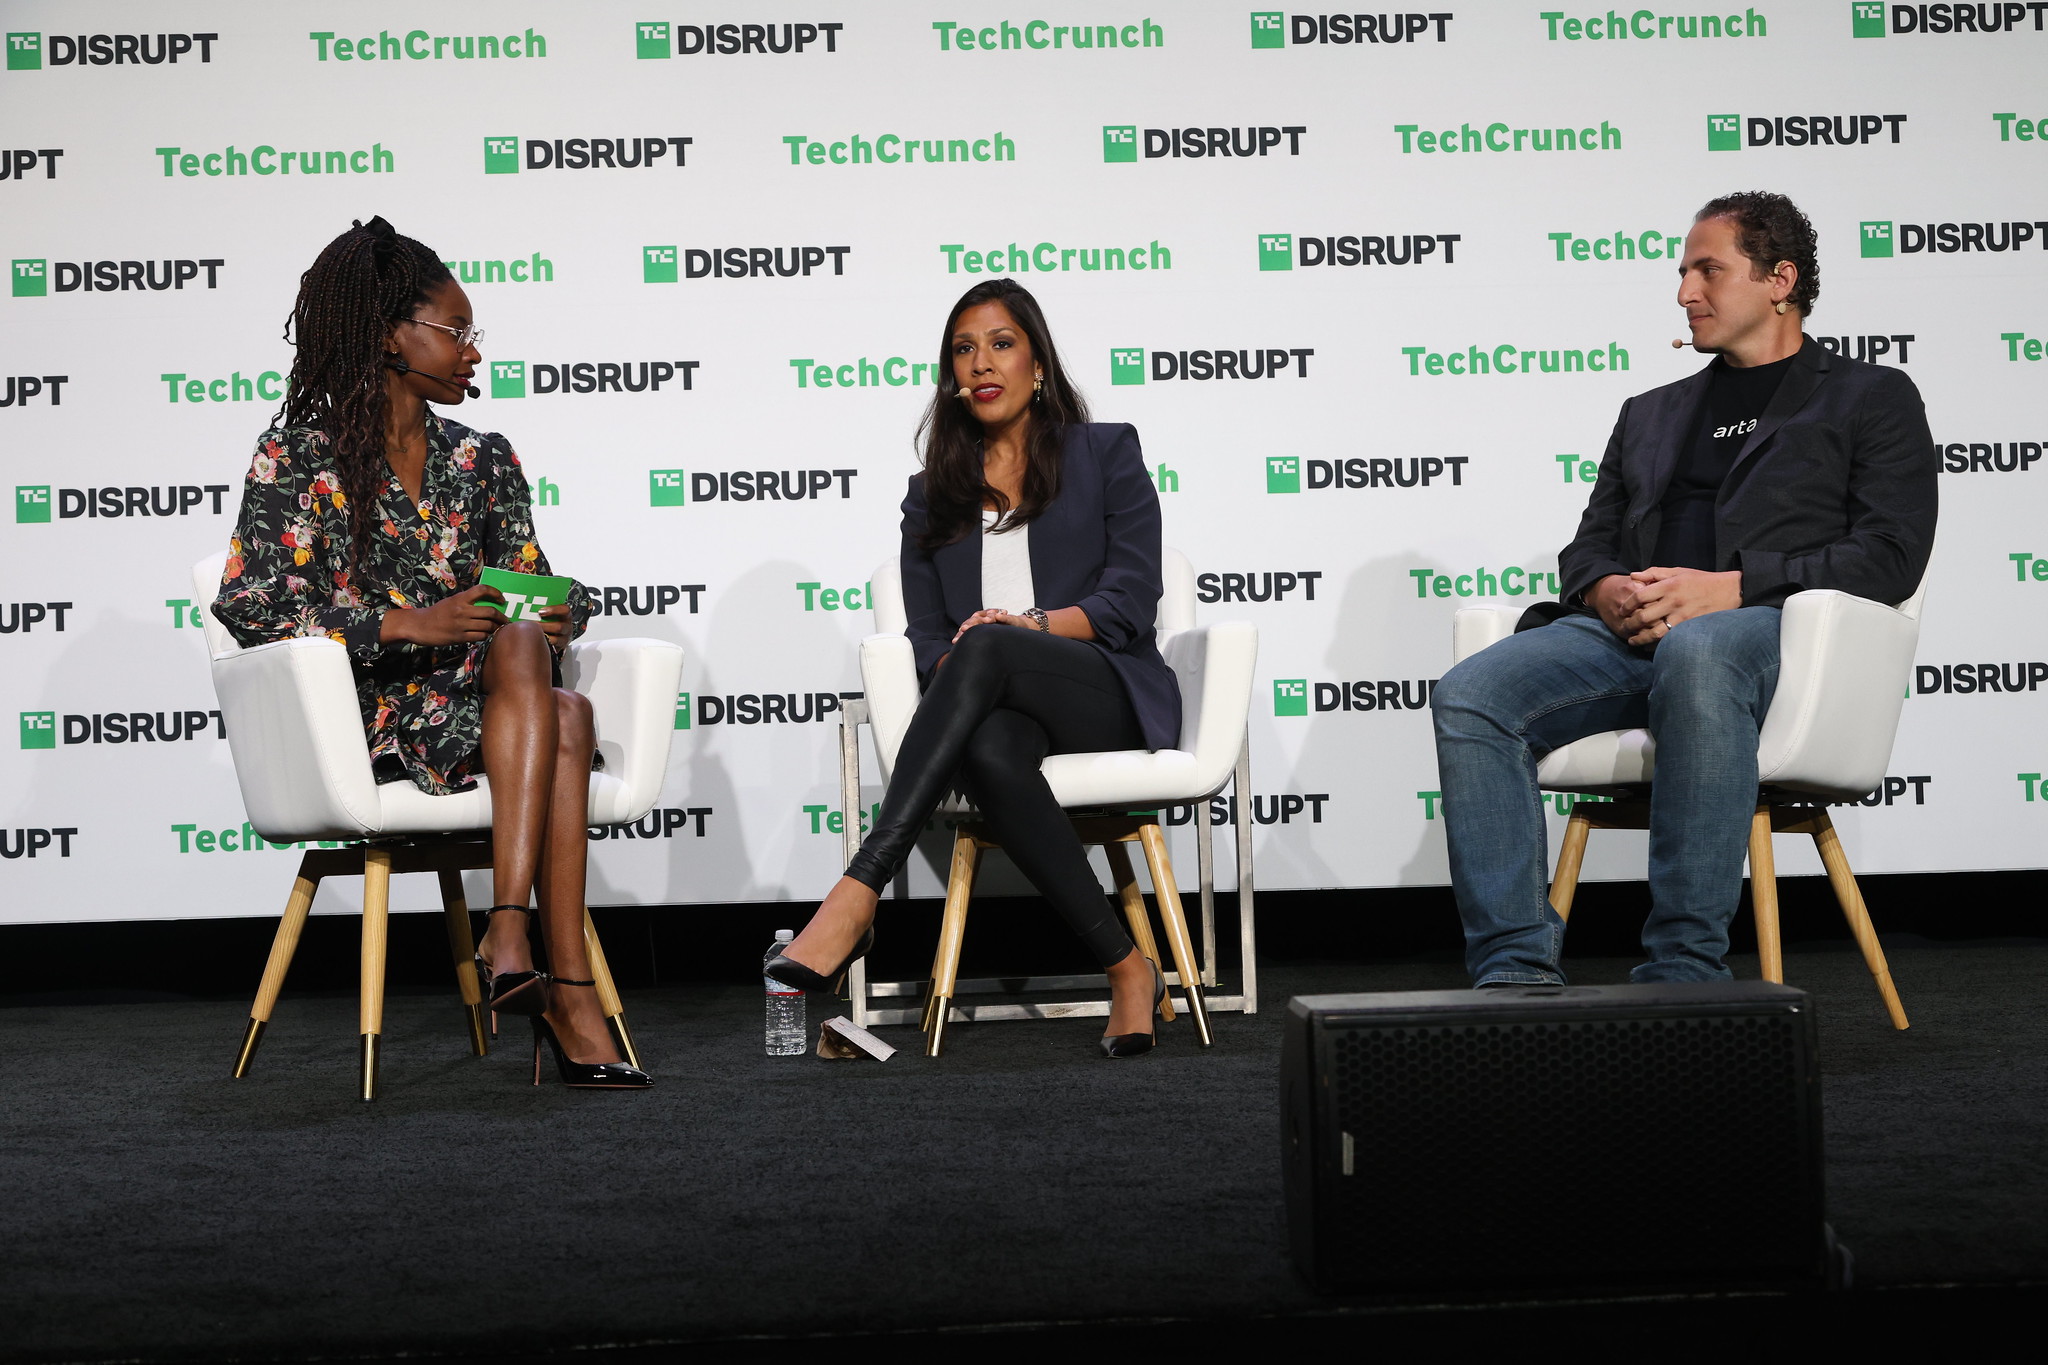 Disrupt Bootstrapping is no longer a dirty word